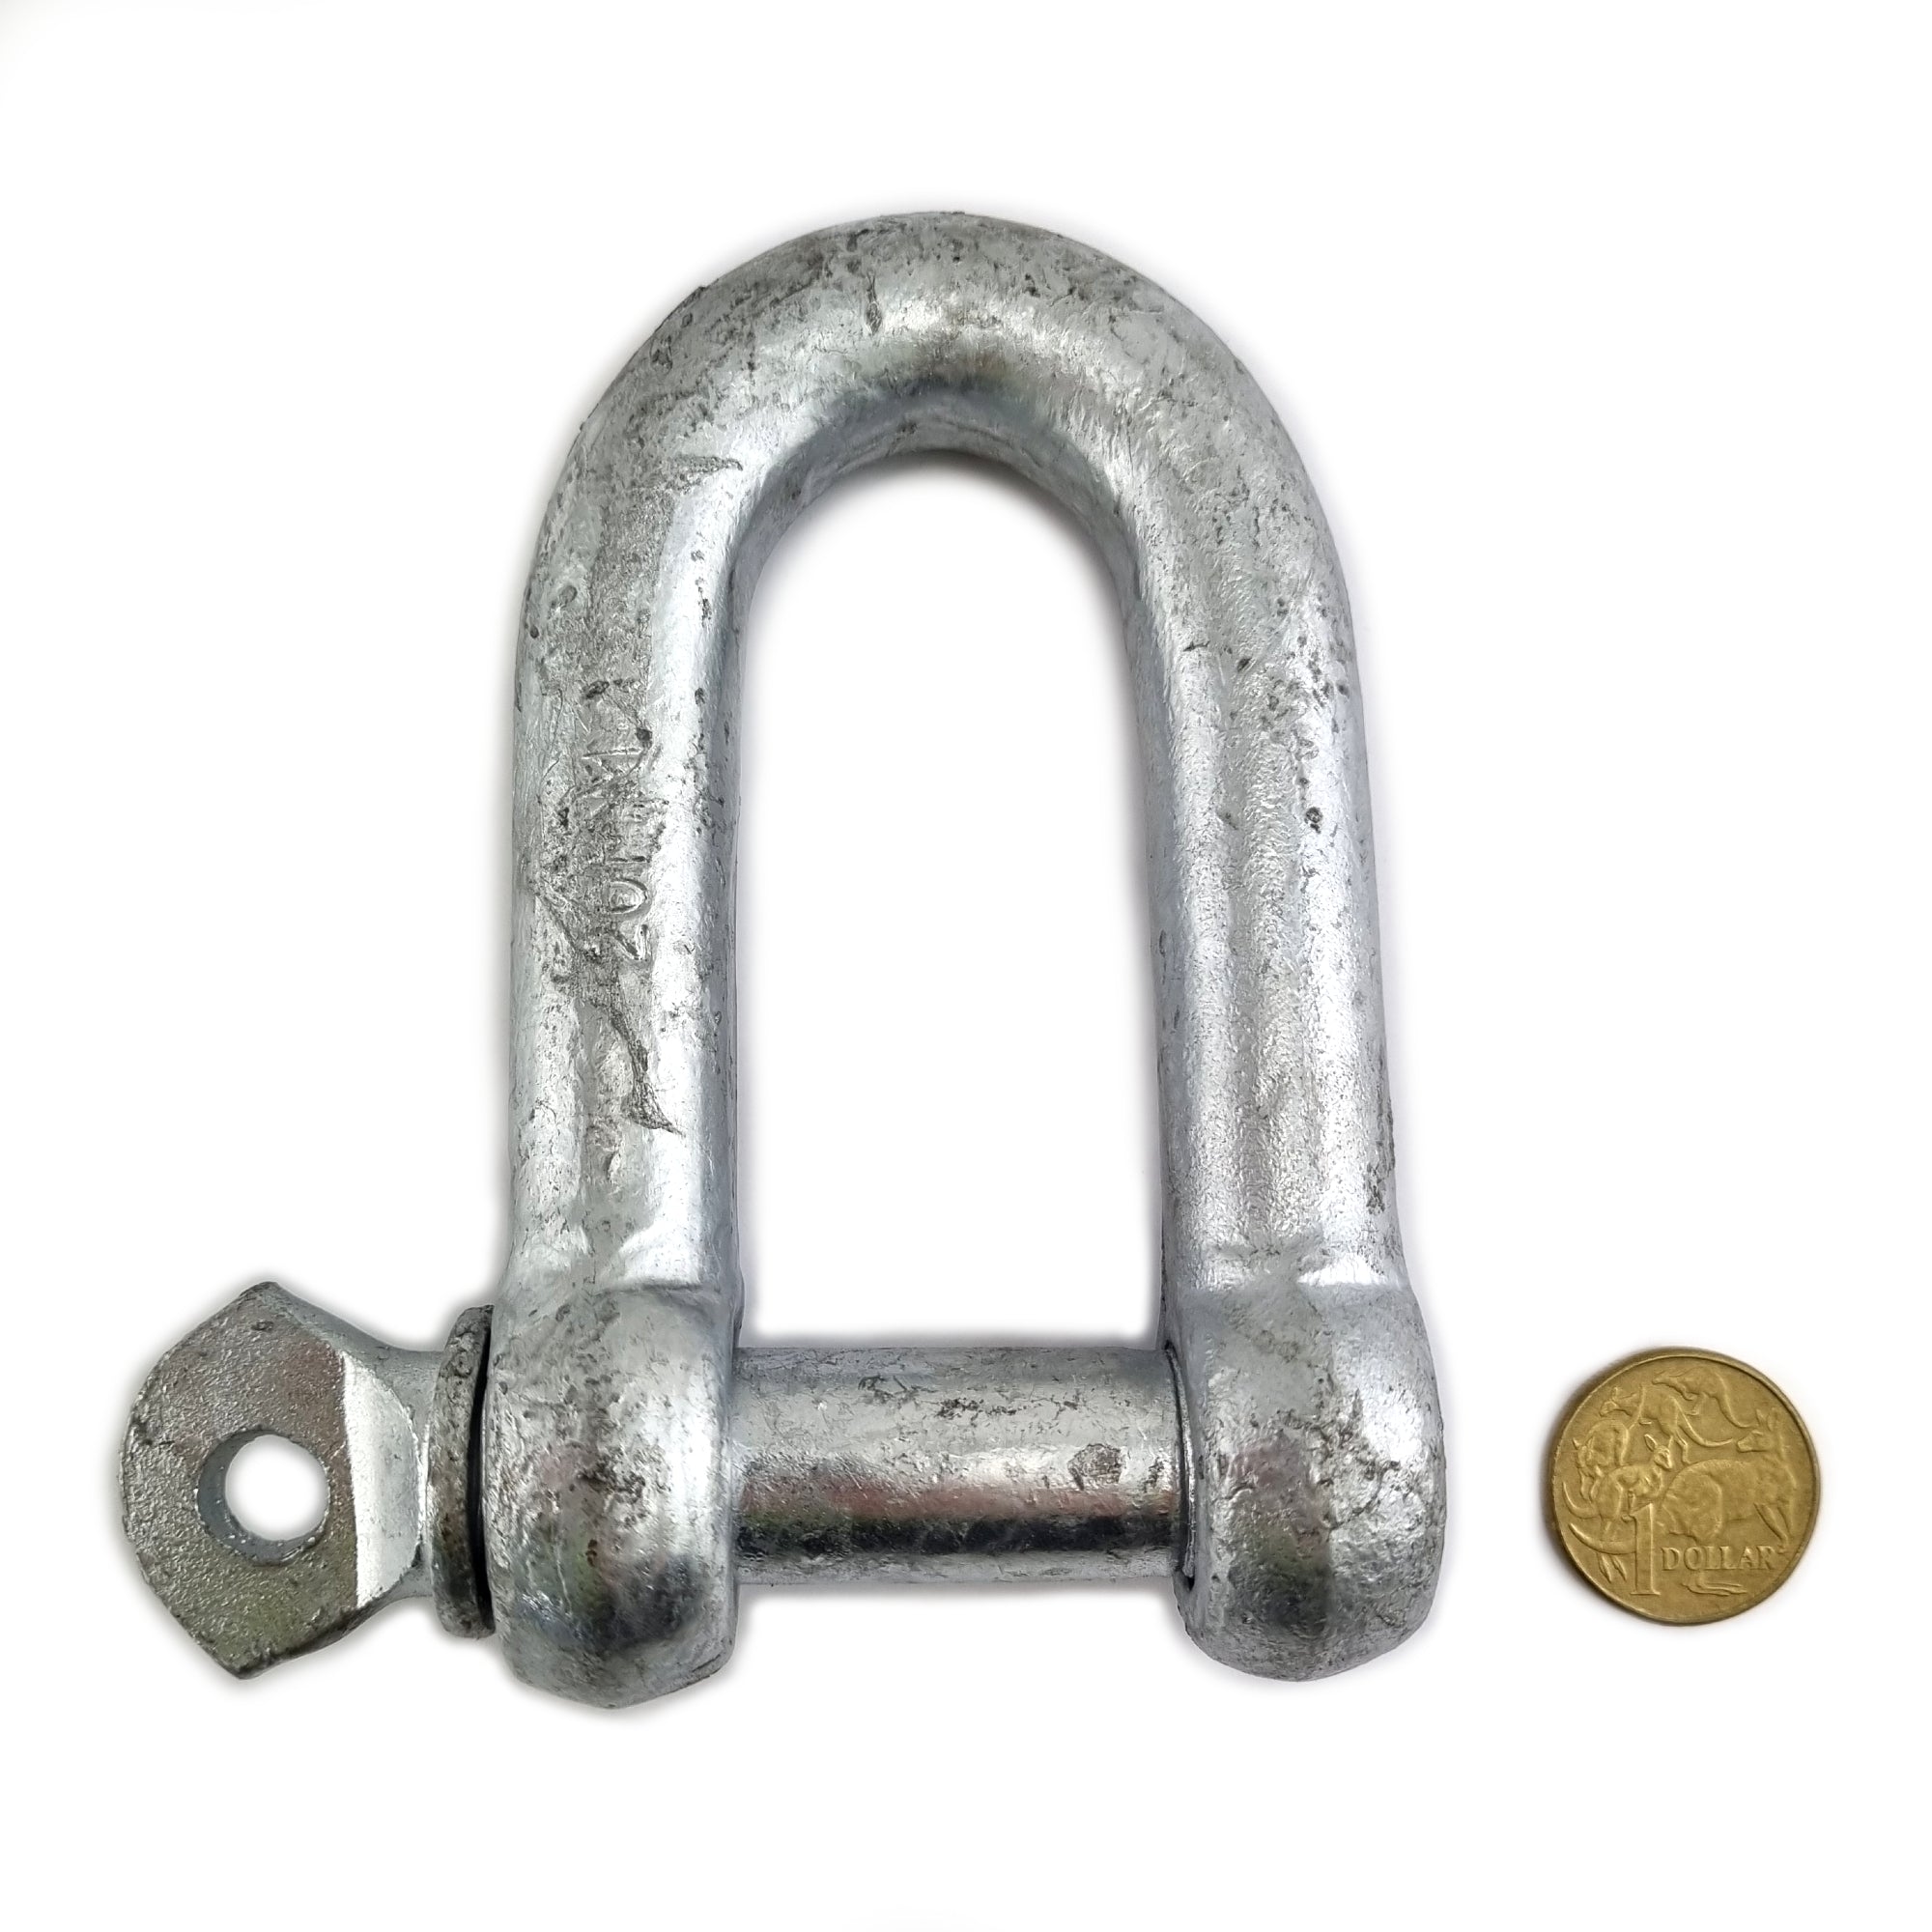 20mm Galvanised D Shackle. Shop D-Shackles and Hardware online at factory direct prices. Shipping Australia wide or Melbourne pick-up